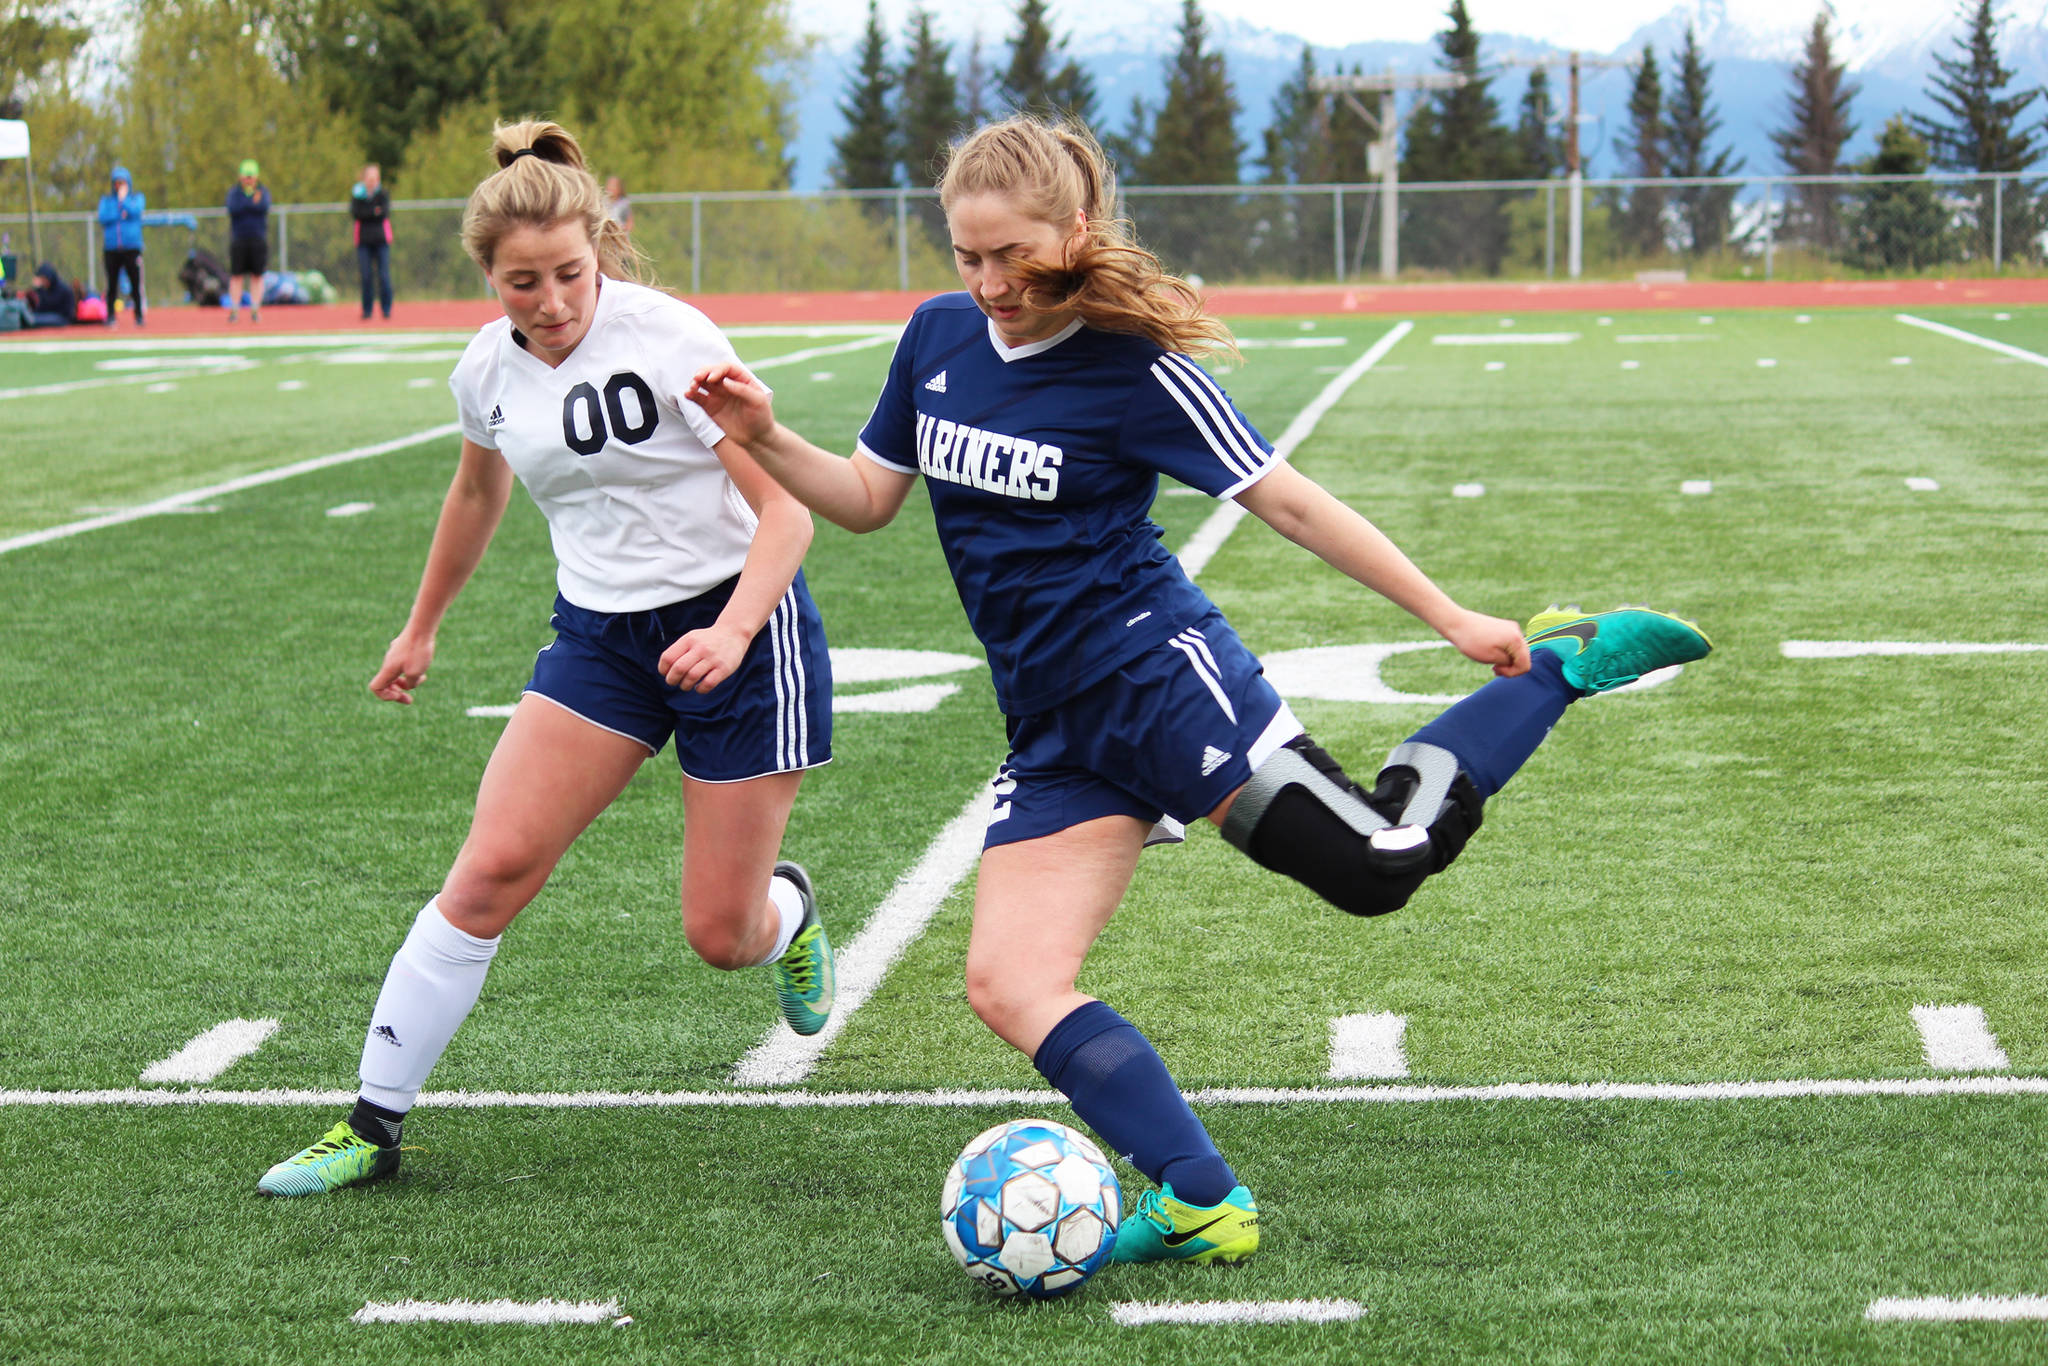 Homer’s Brenna McCarron (right) prepares to send the ball up the field under pressure from Soldotna’s Ryann Cannava during the girls championship game of the Peninsula Conference Soccer Tournament on Saturday, May 18, 2019 at Homer High School in Homer, Alaska. (Photo by Megan Pacer/Homer News)